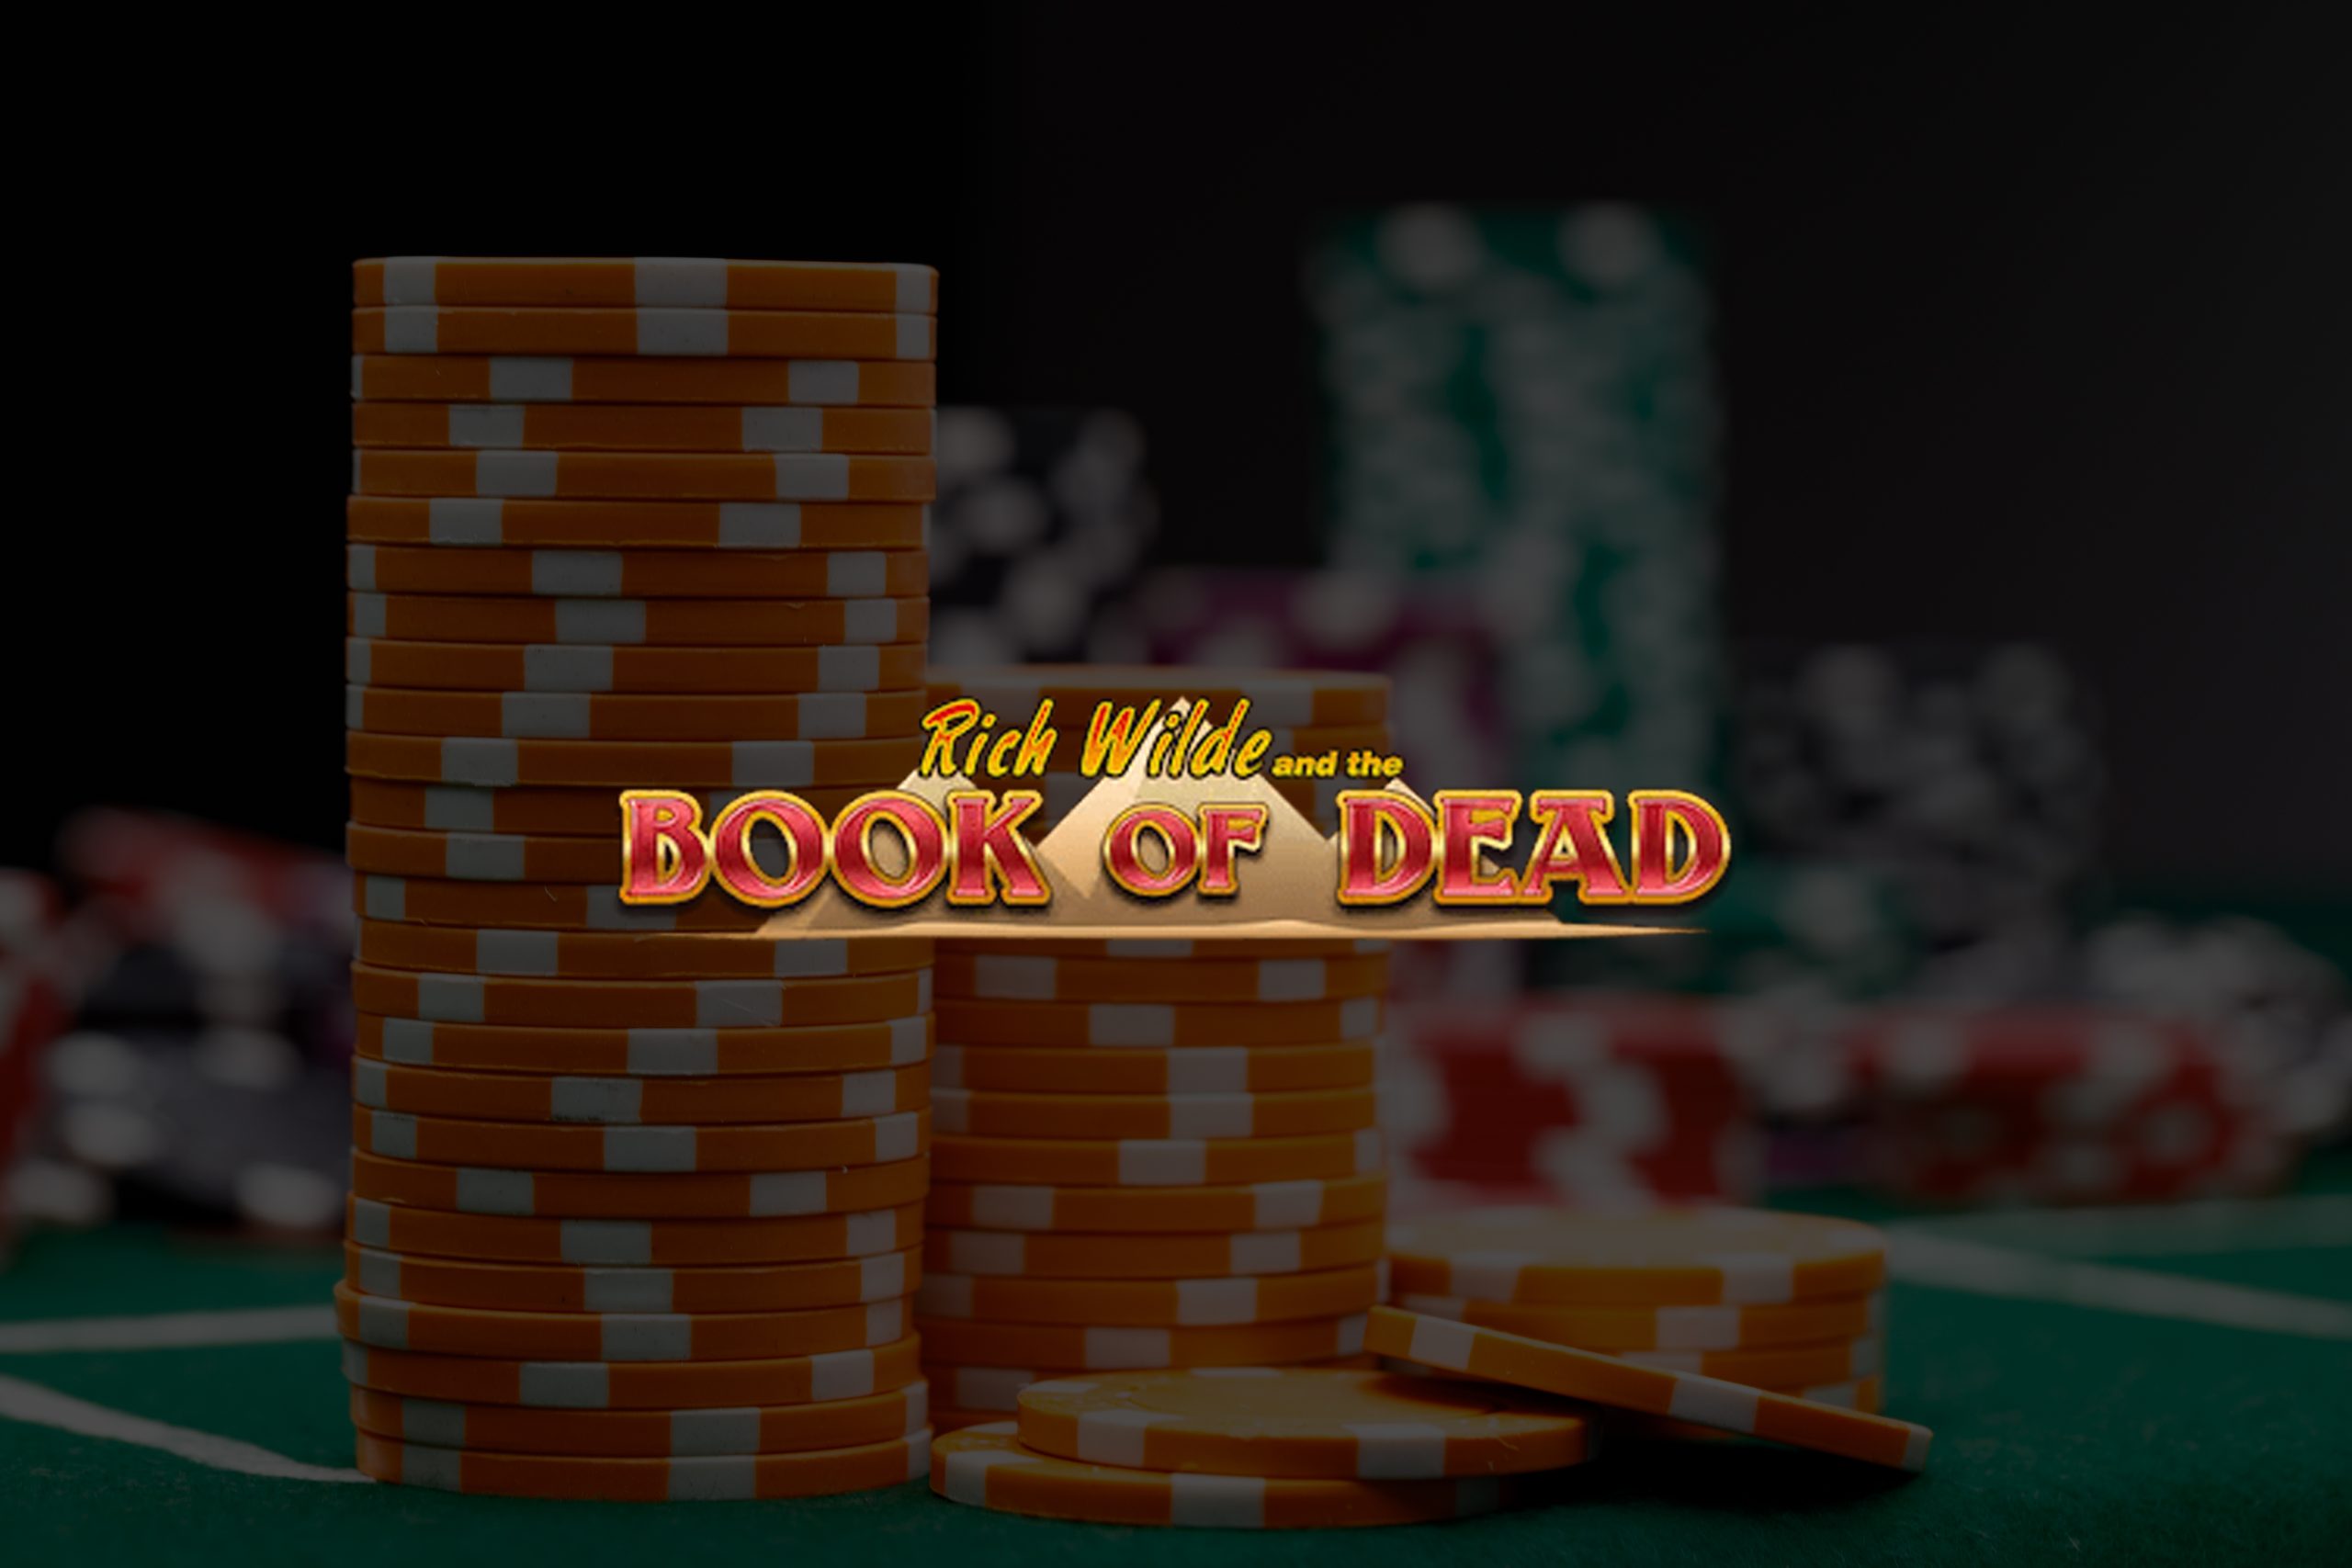 Review On Book Of Dead by Play'n GO: Not On Gamstop 